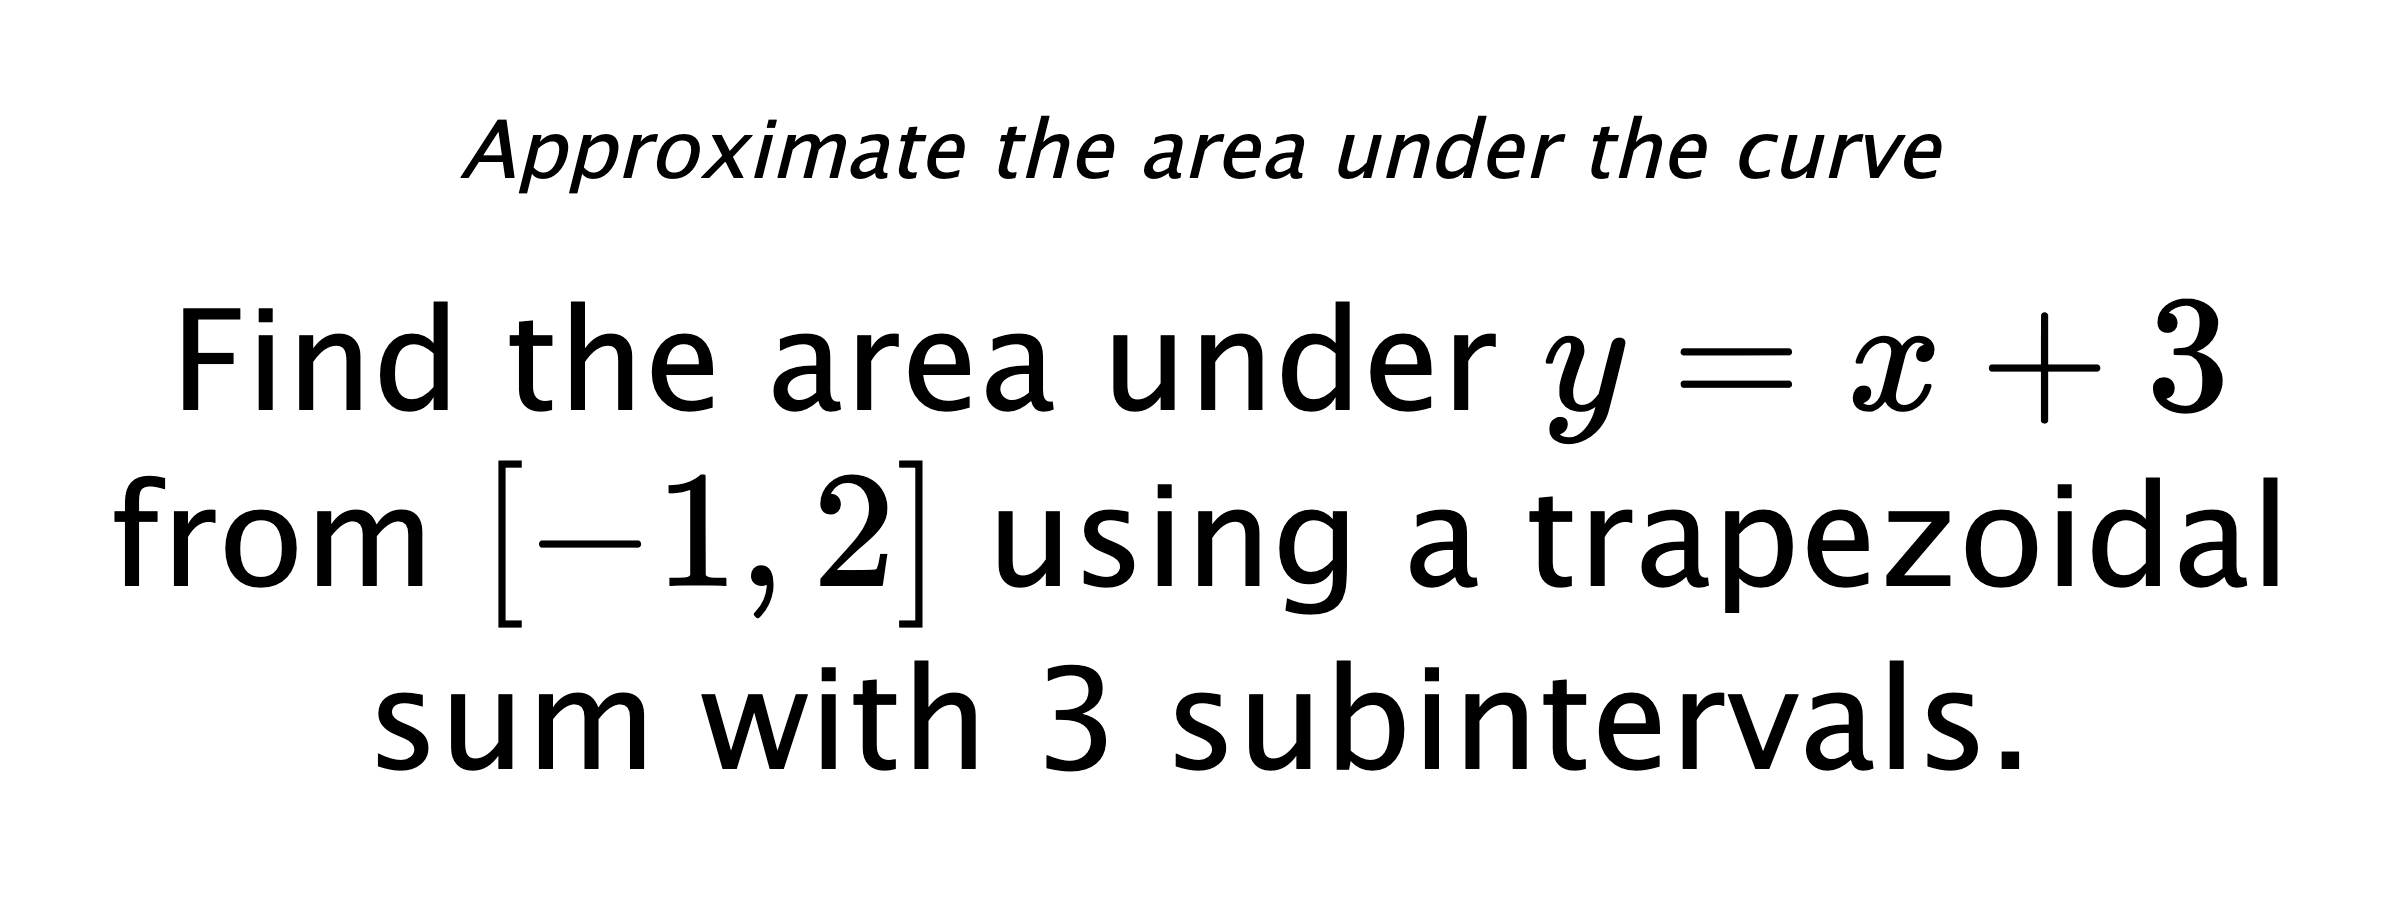 Approximate the area under the curve Find the area under $ y=x+3 $ from $ [-1,2] $ using a trapezoidal sum with 3 subintervals.